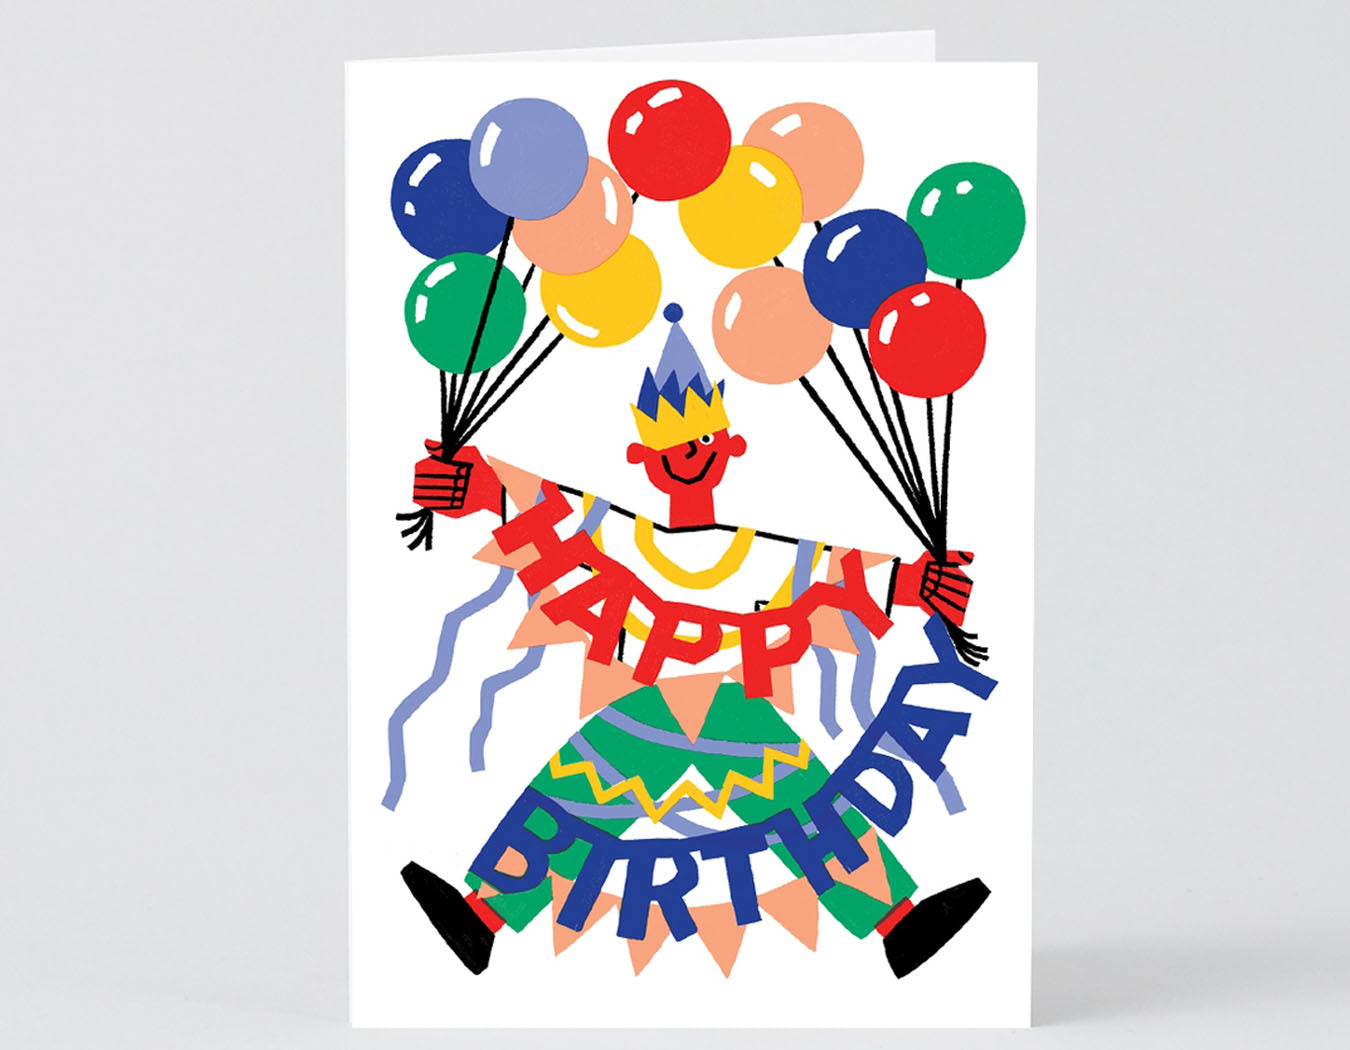 illustrated man with crown party hat holding multiple balloons and a banner that spells out happy birthday